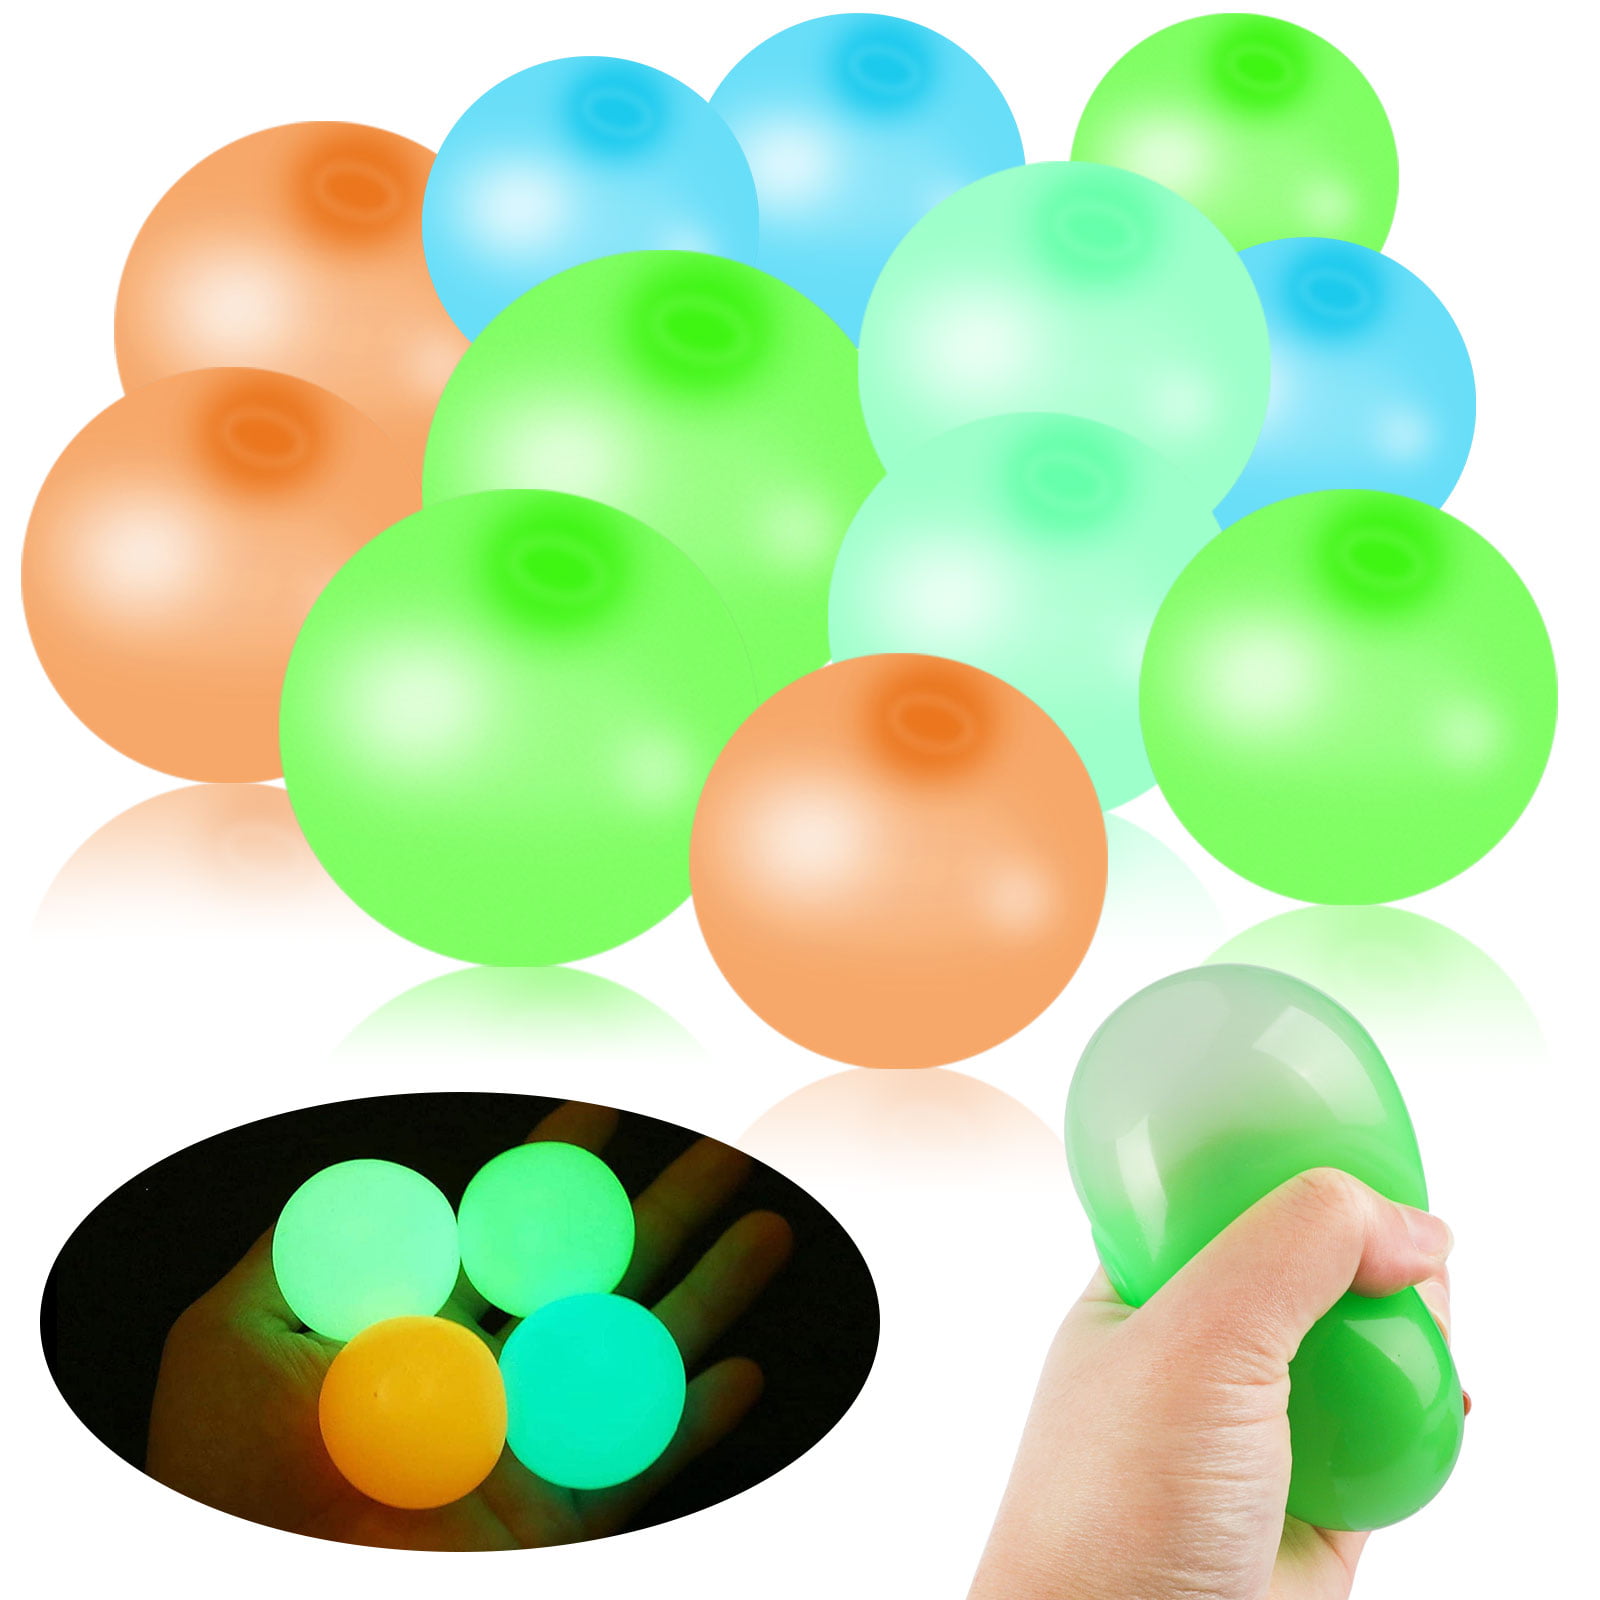 Details about   4pcs Sticky Balls Squeeze  Fluorescent Ceiling Stress Relief Relax Kids Adult 